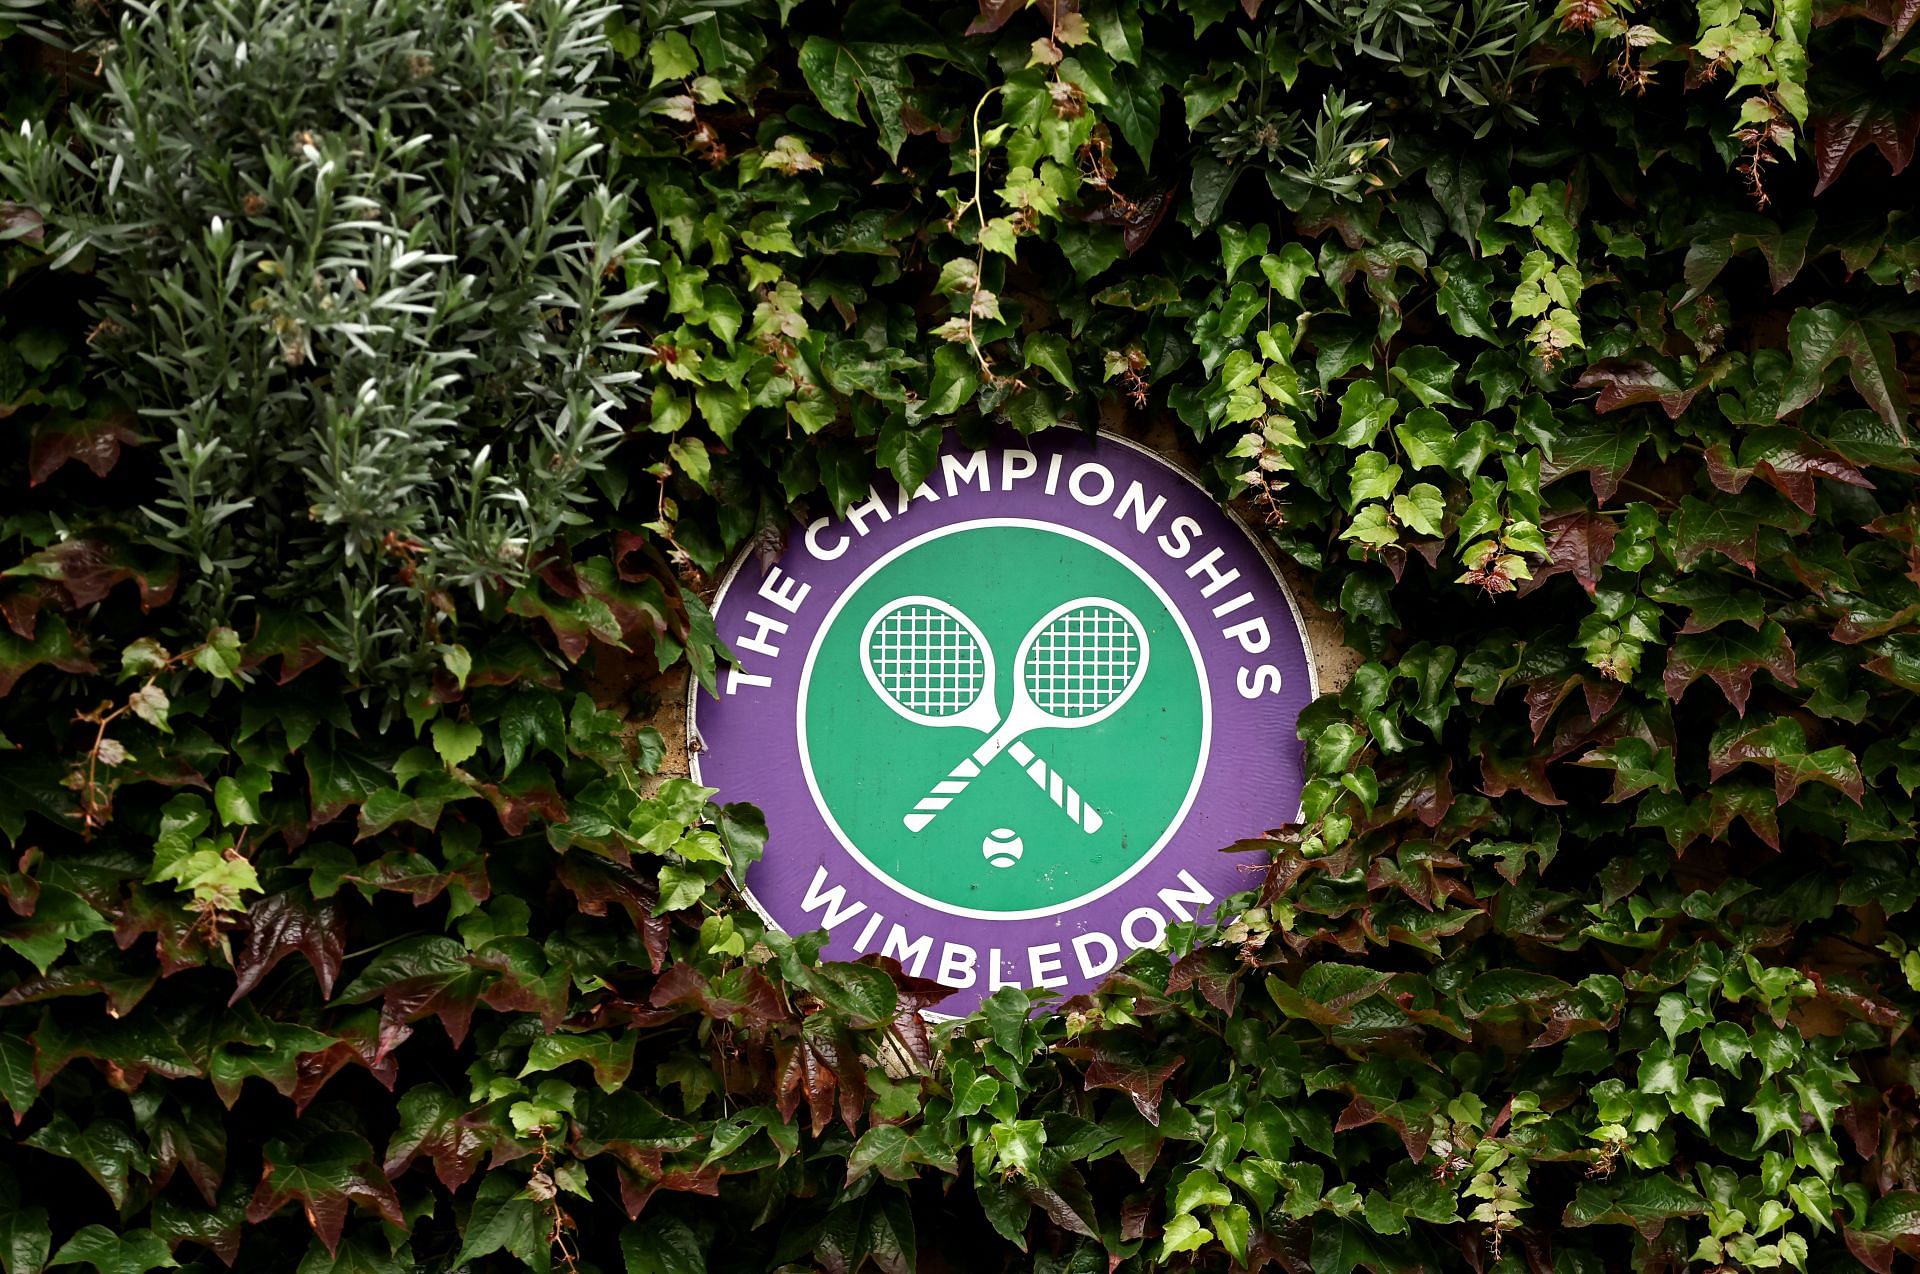 What is Wimbledon Middle Sunday and since when has it been in practice? All you need to know